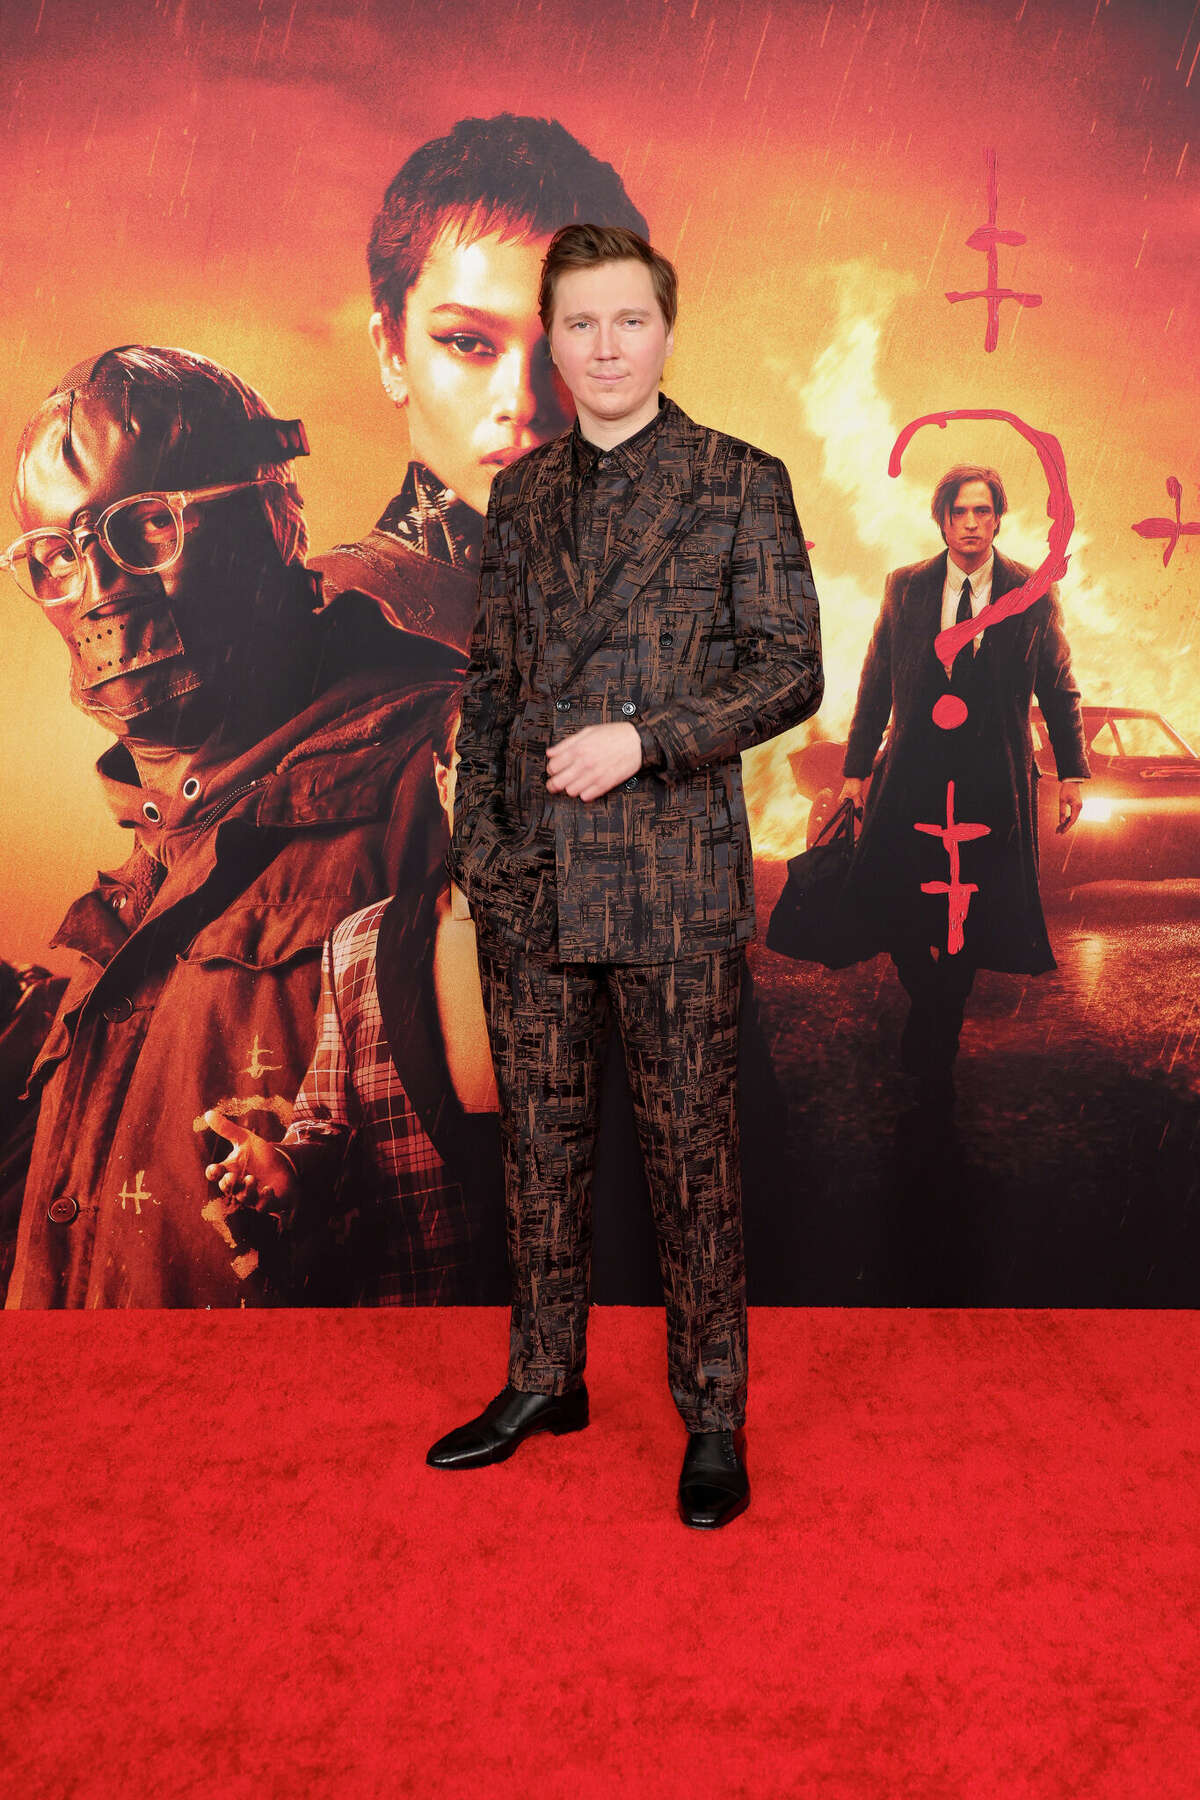 NEW YORK, NEW YORK - MARCH 01: Paul Dano attends "The Batman" World Premiere on March 01, 2022 in New York City. (Photo by Cindy Ord/WireImage)